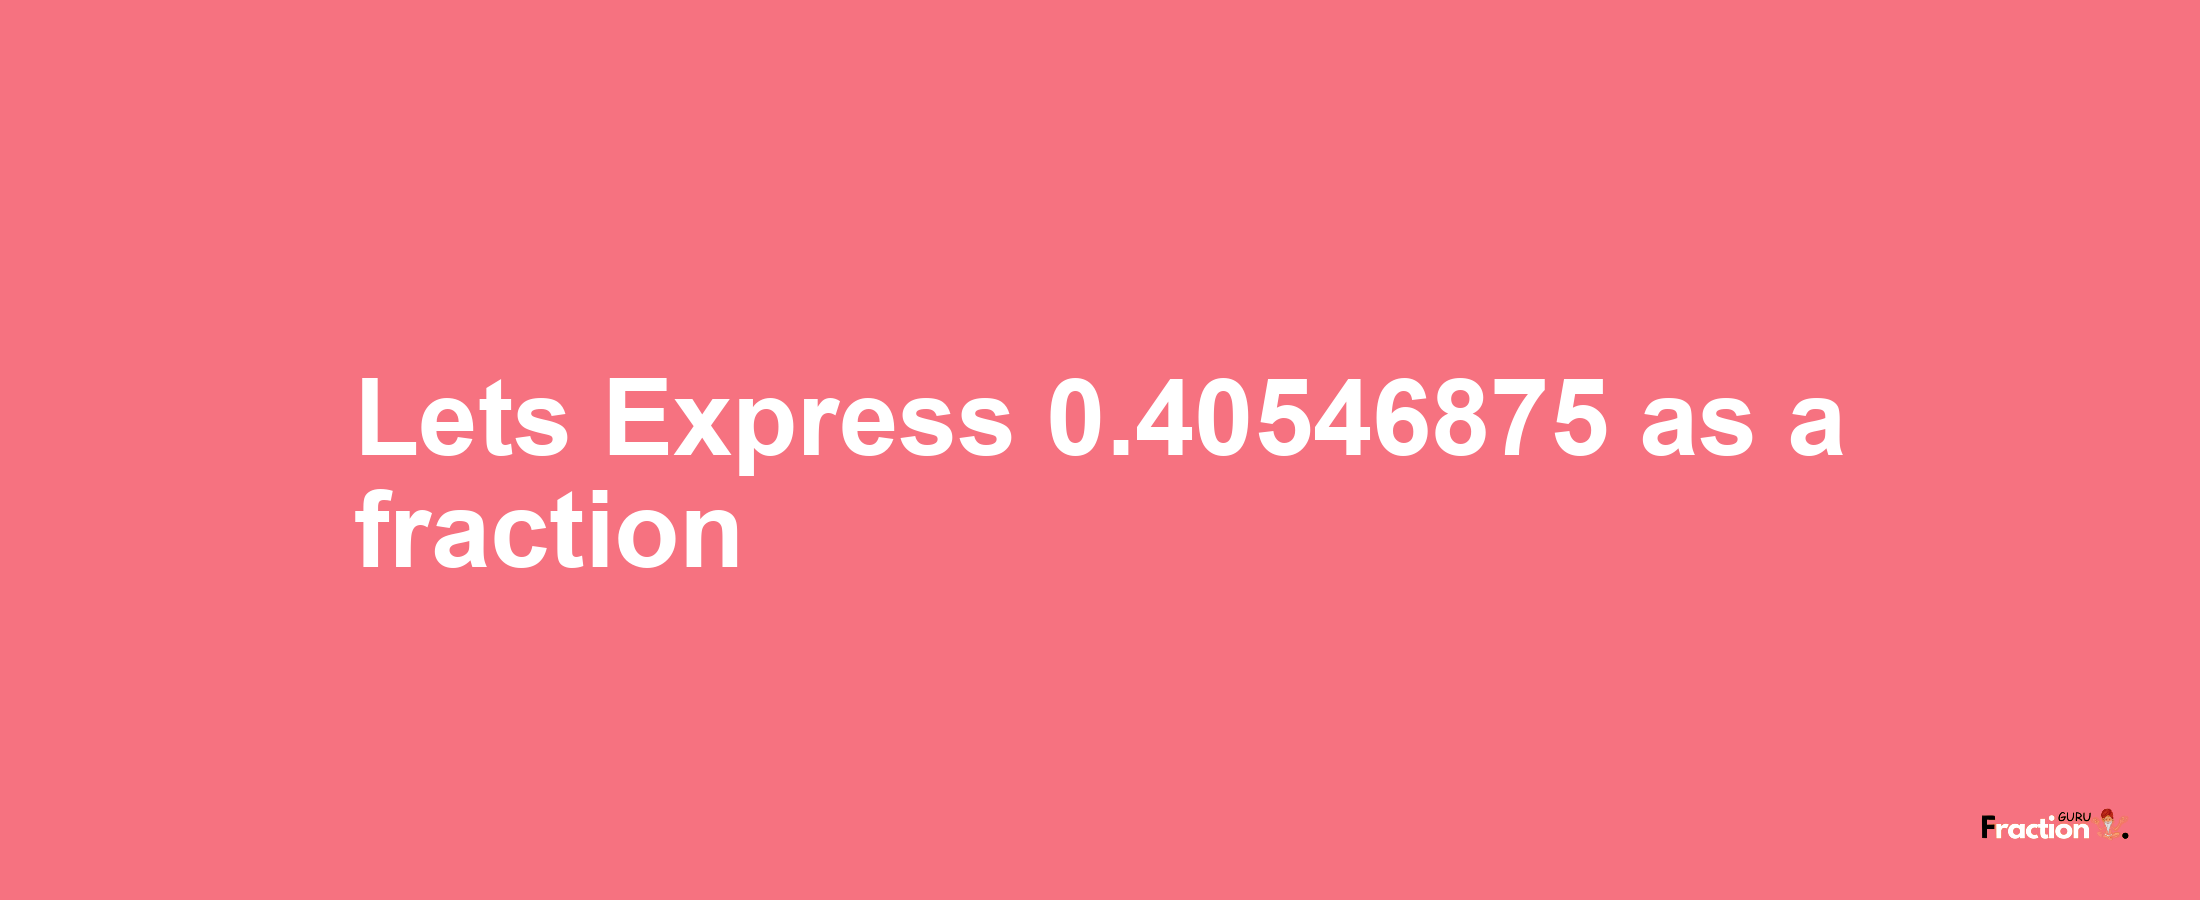 Lets Express 0.40546875 as afraction